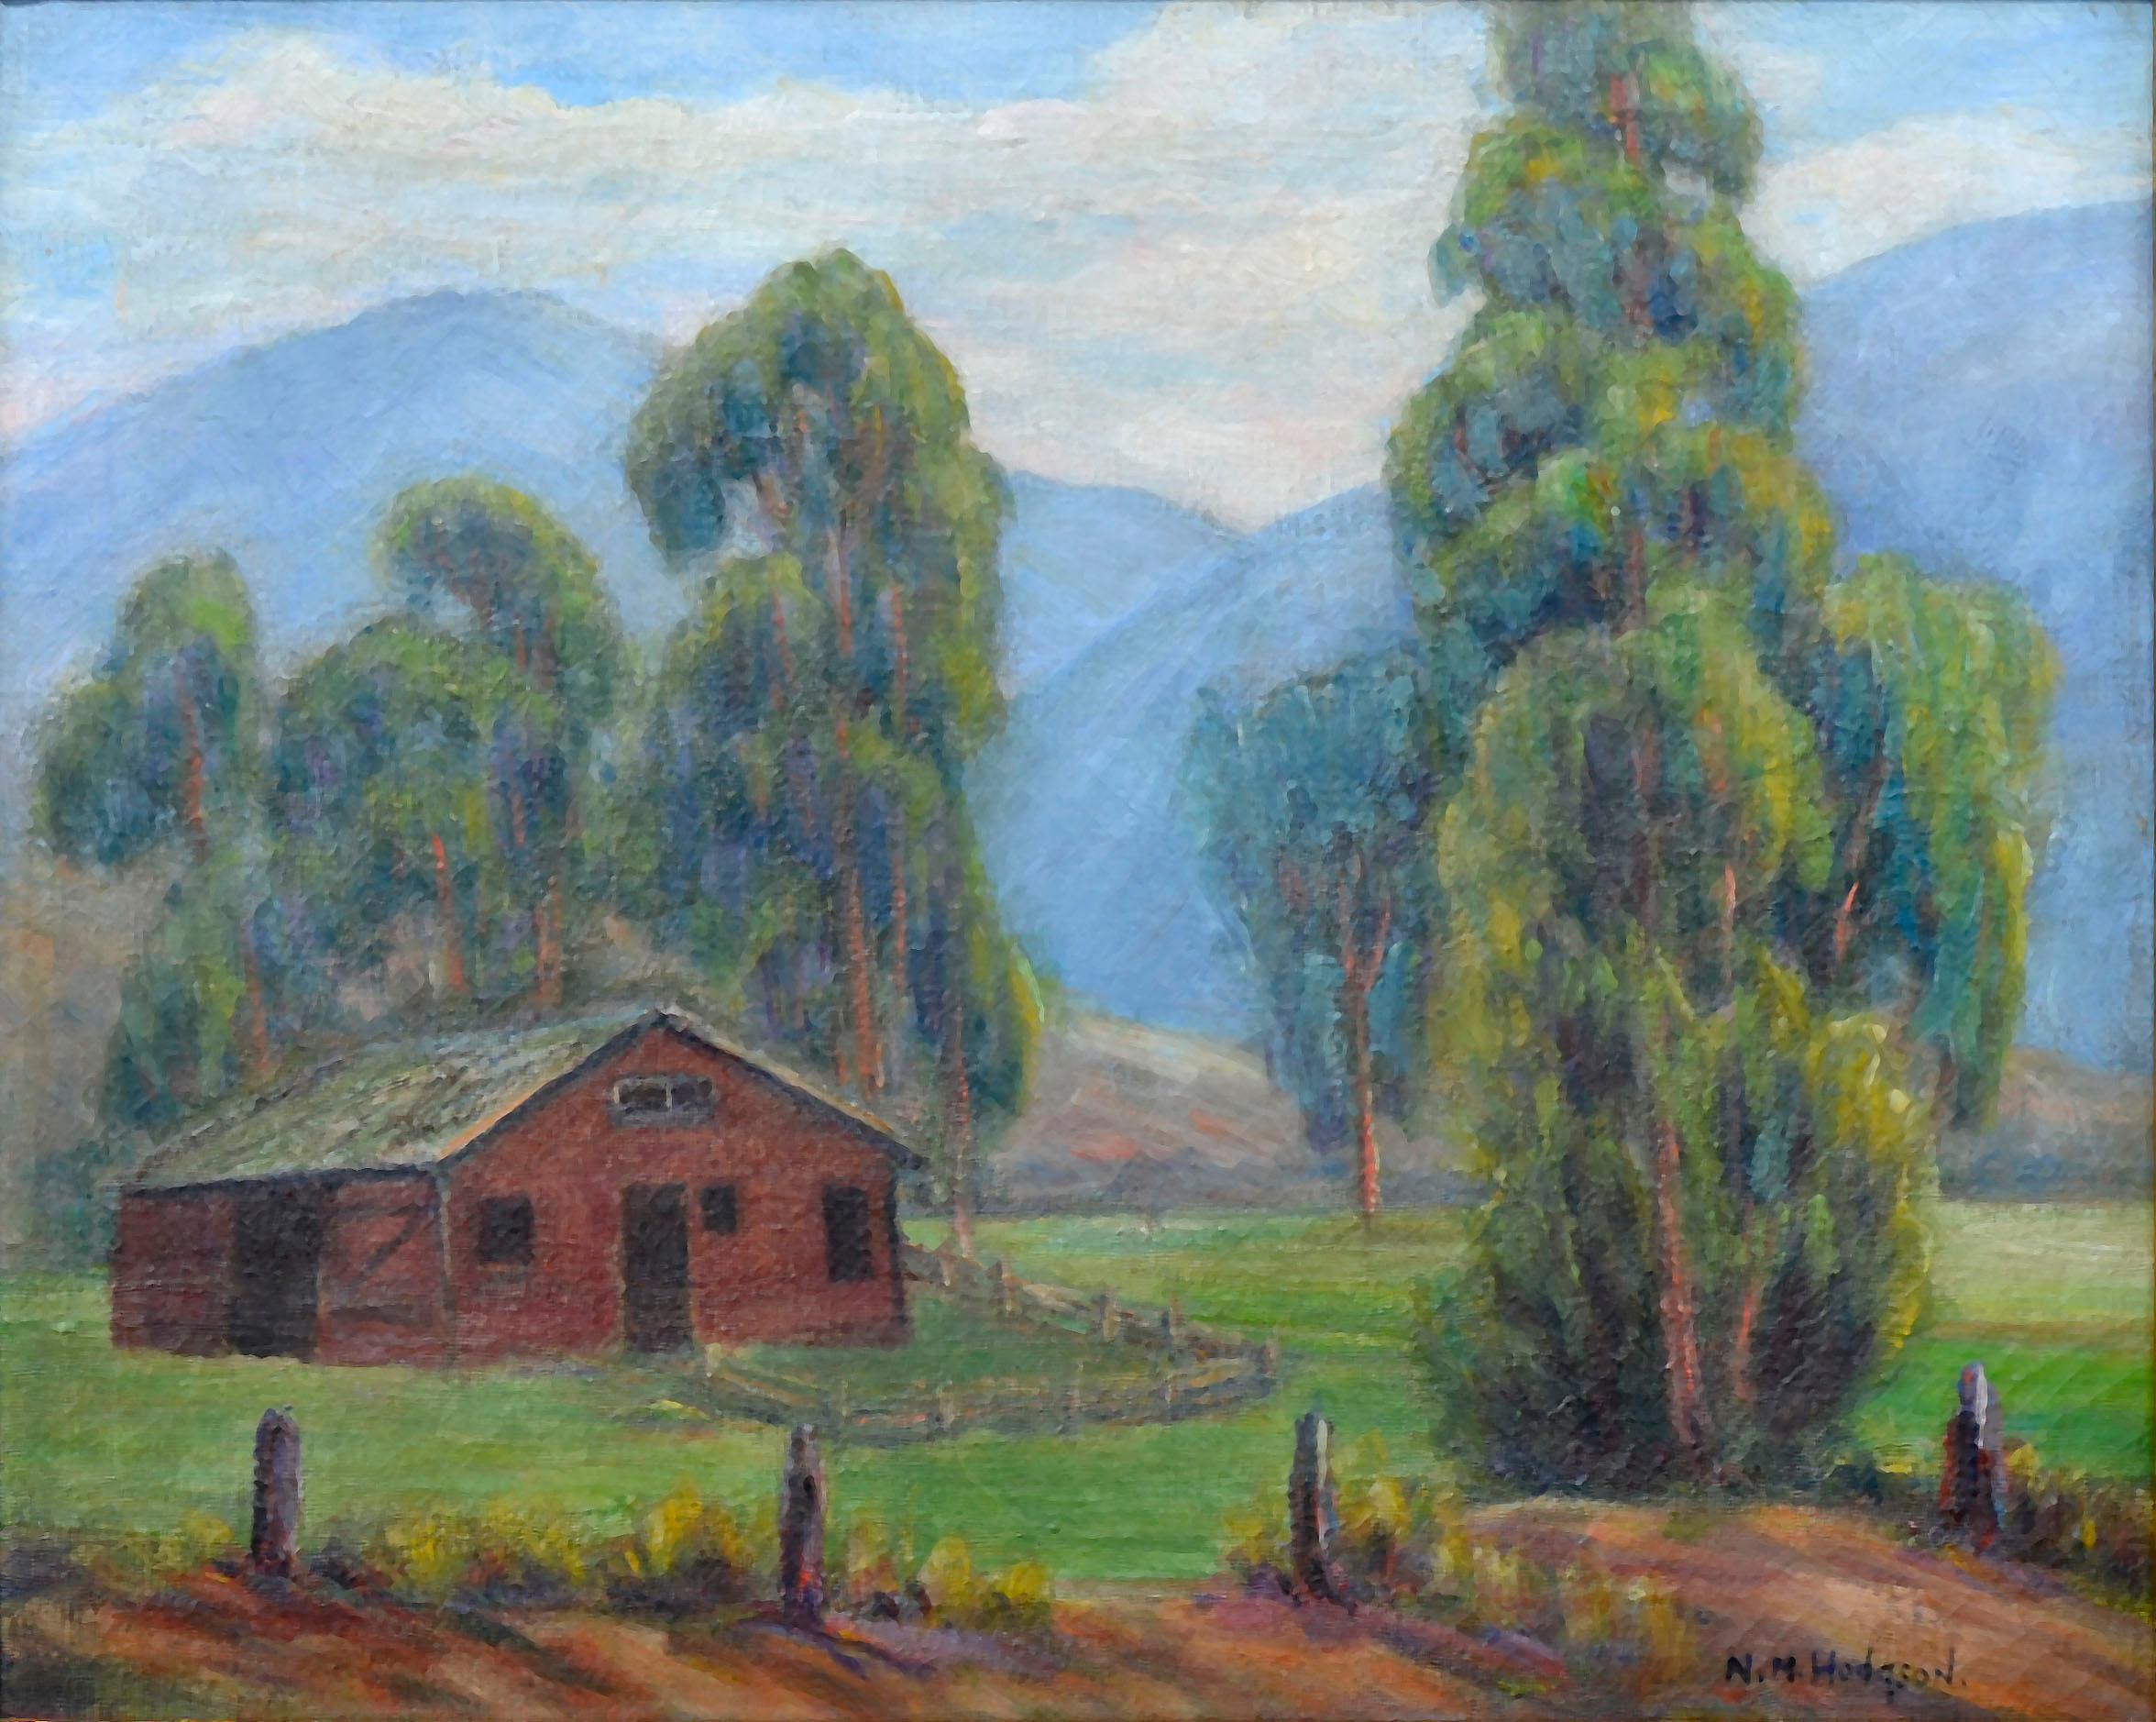 Red Barn Near Foothills Landscape - Painting by Nellie M. Hodgson